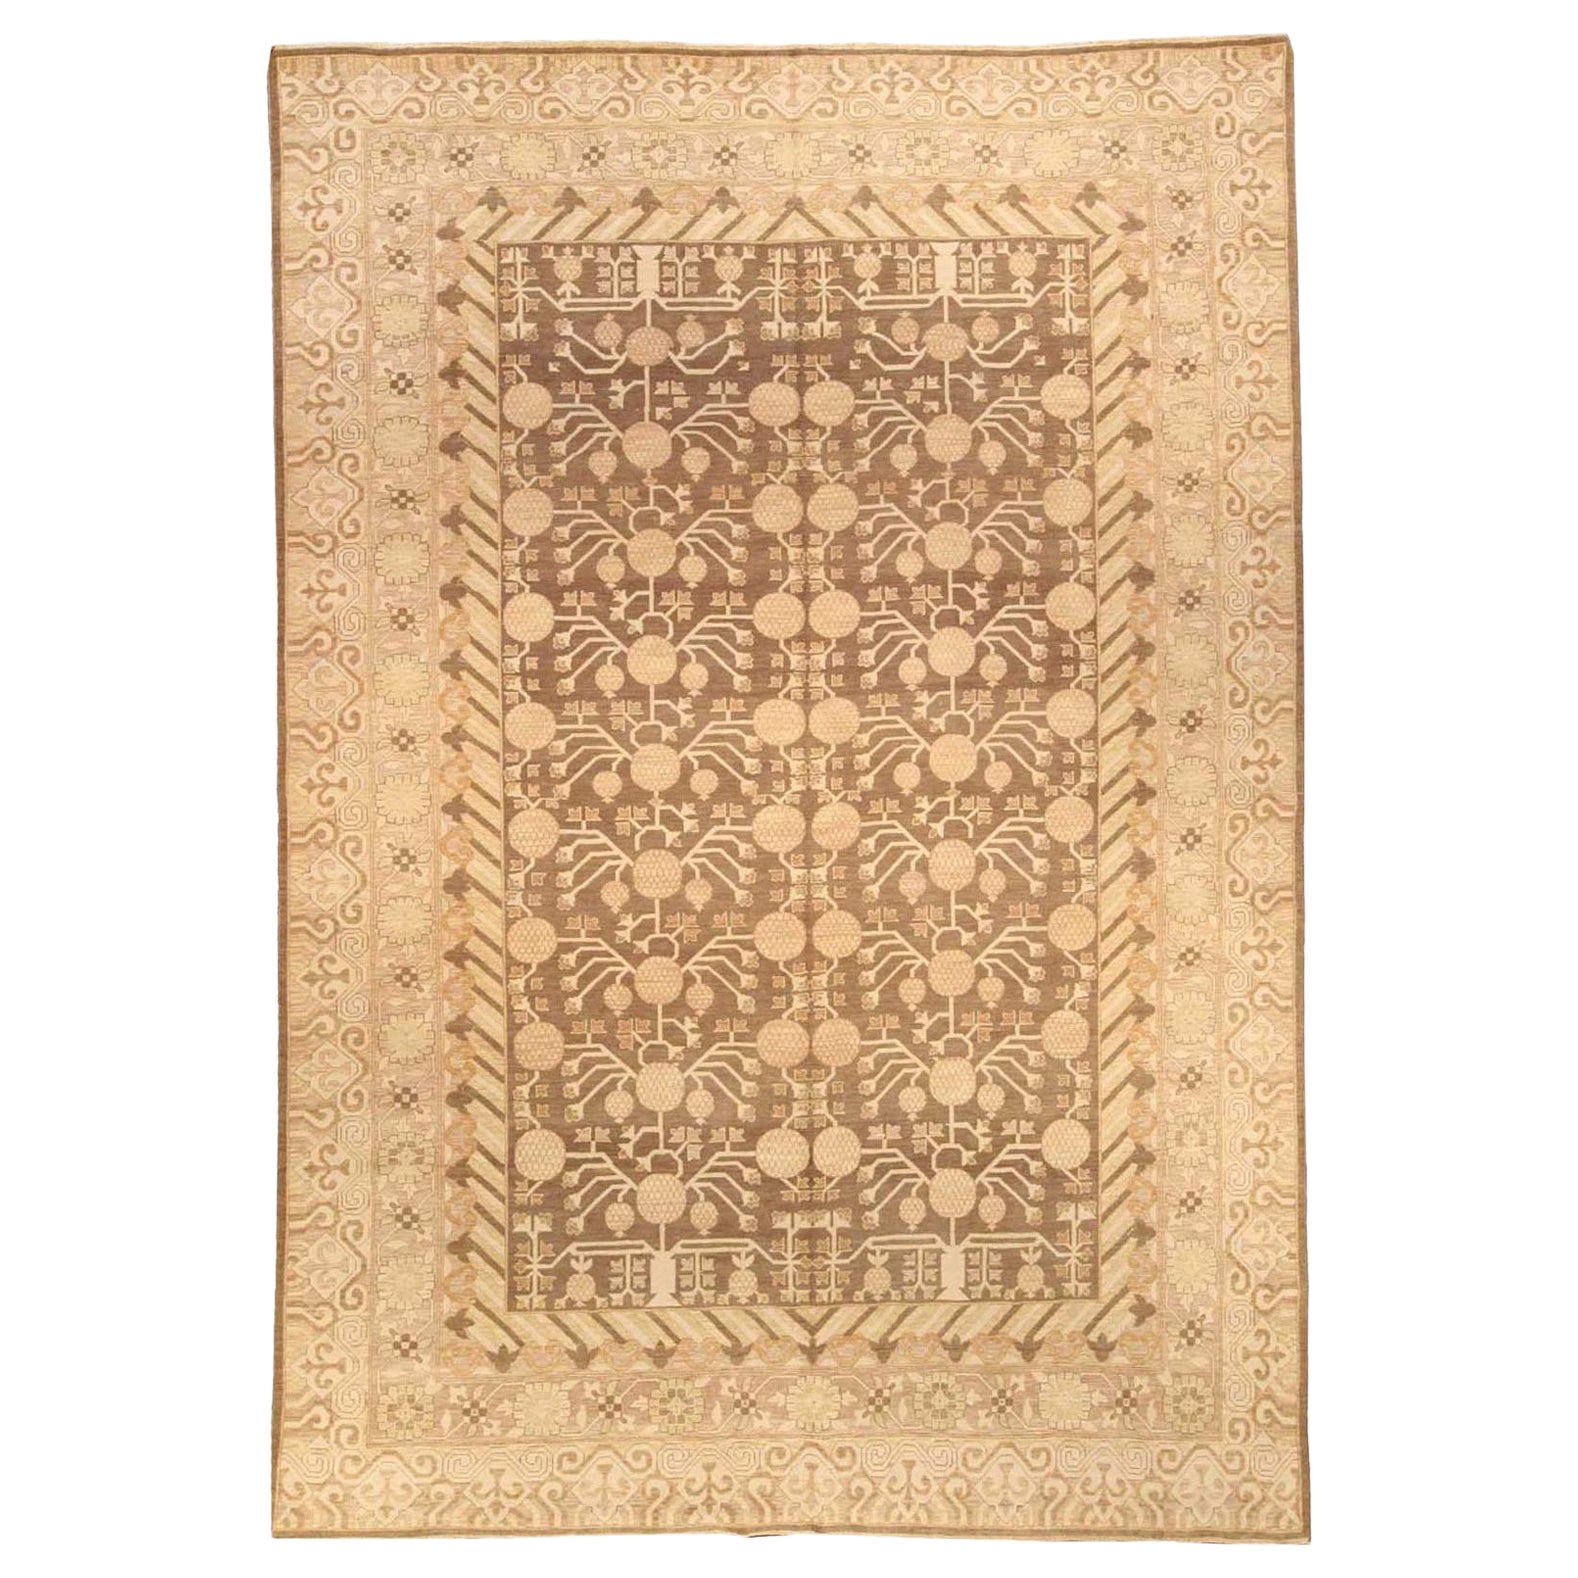 Contemporary Samarkand Beige Brown Hand Knotted Wool Rug by Doris Leslie Blau